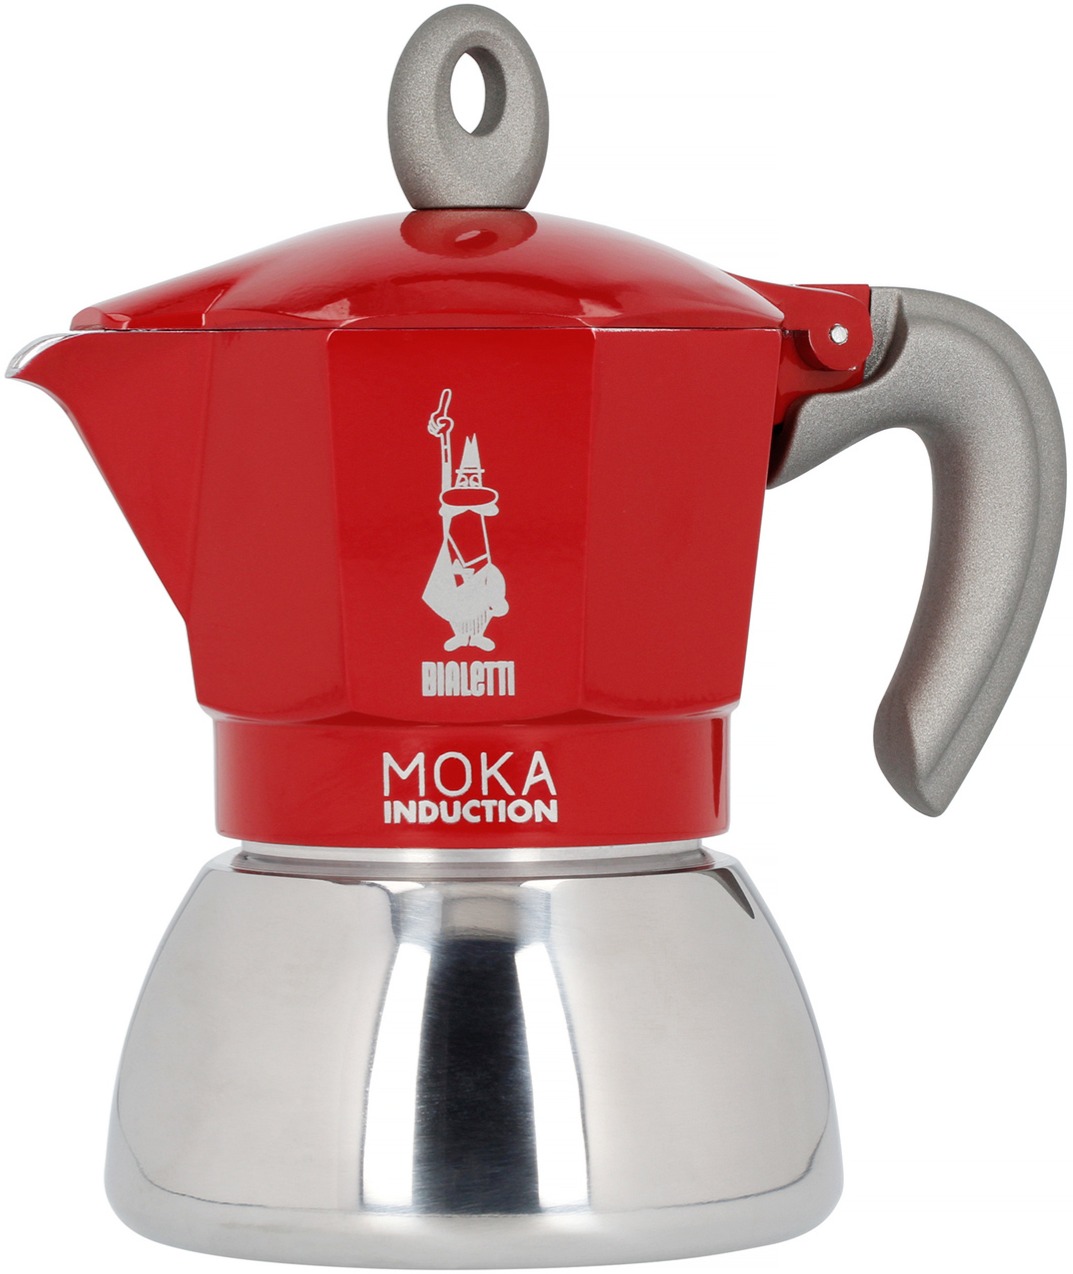 https://www.cremashop.se/content/products/bialetti/moka-induction-red/6062-f8e71ee7b1c9a5211bdca0b689871a01.jpg